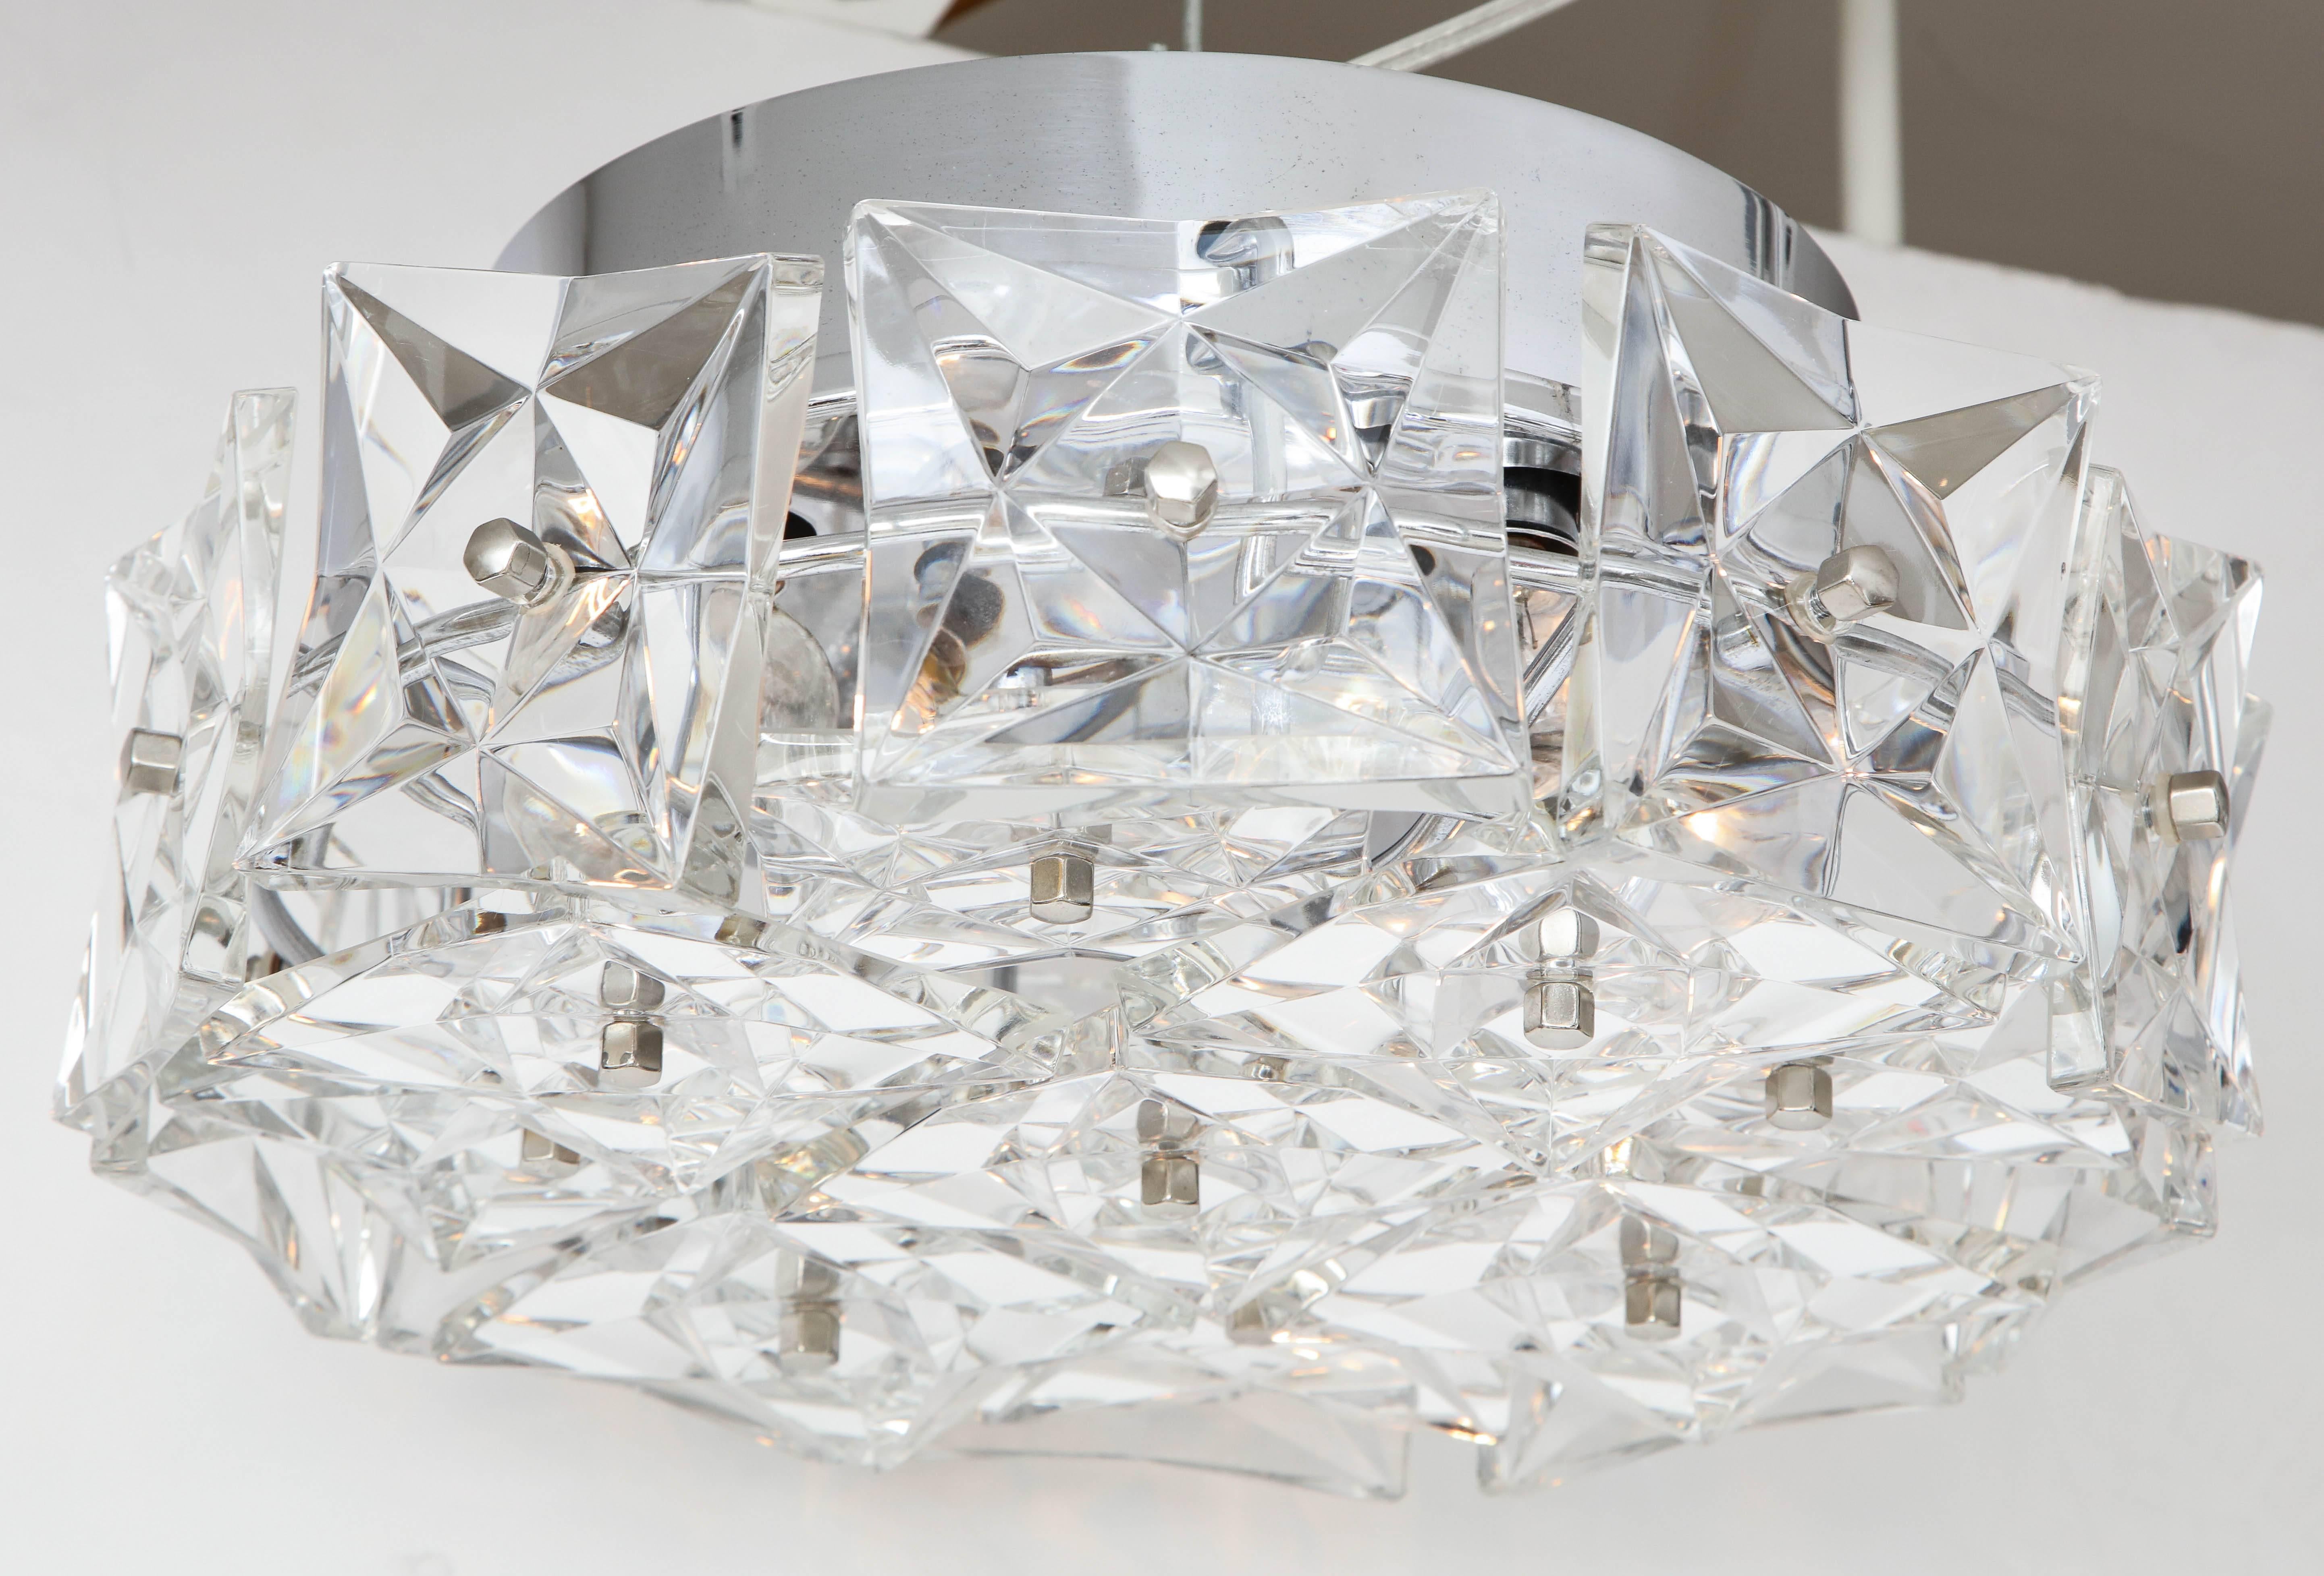 Ultra glam flush mount fixture featuring Austrian deep cut square crystal prisms on a polished nickel frame. Each fixture houses five light sources. Rewired for use in the USA.

Currently a pair is available.